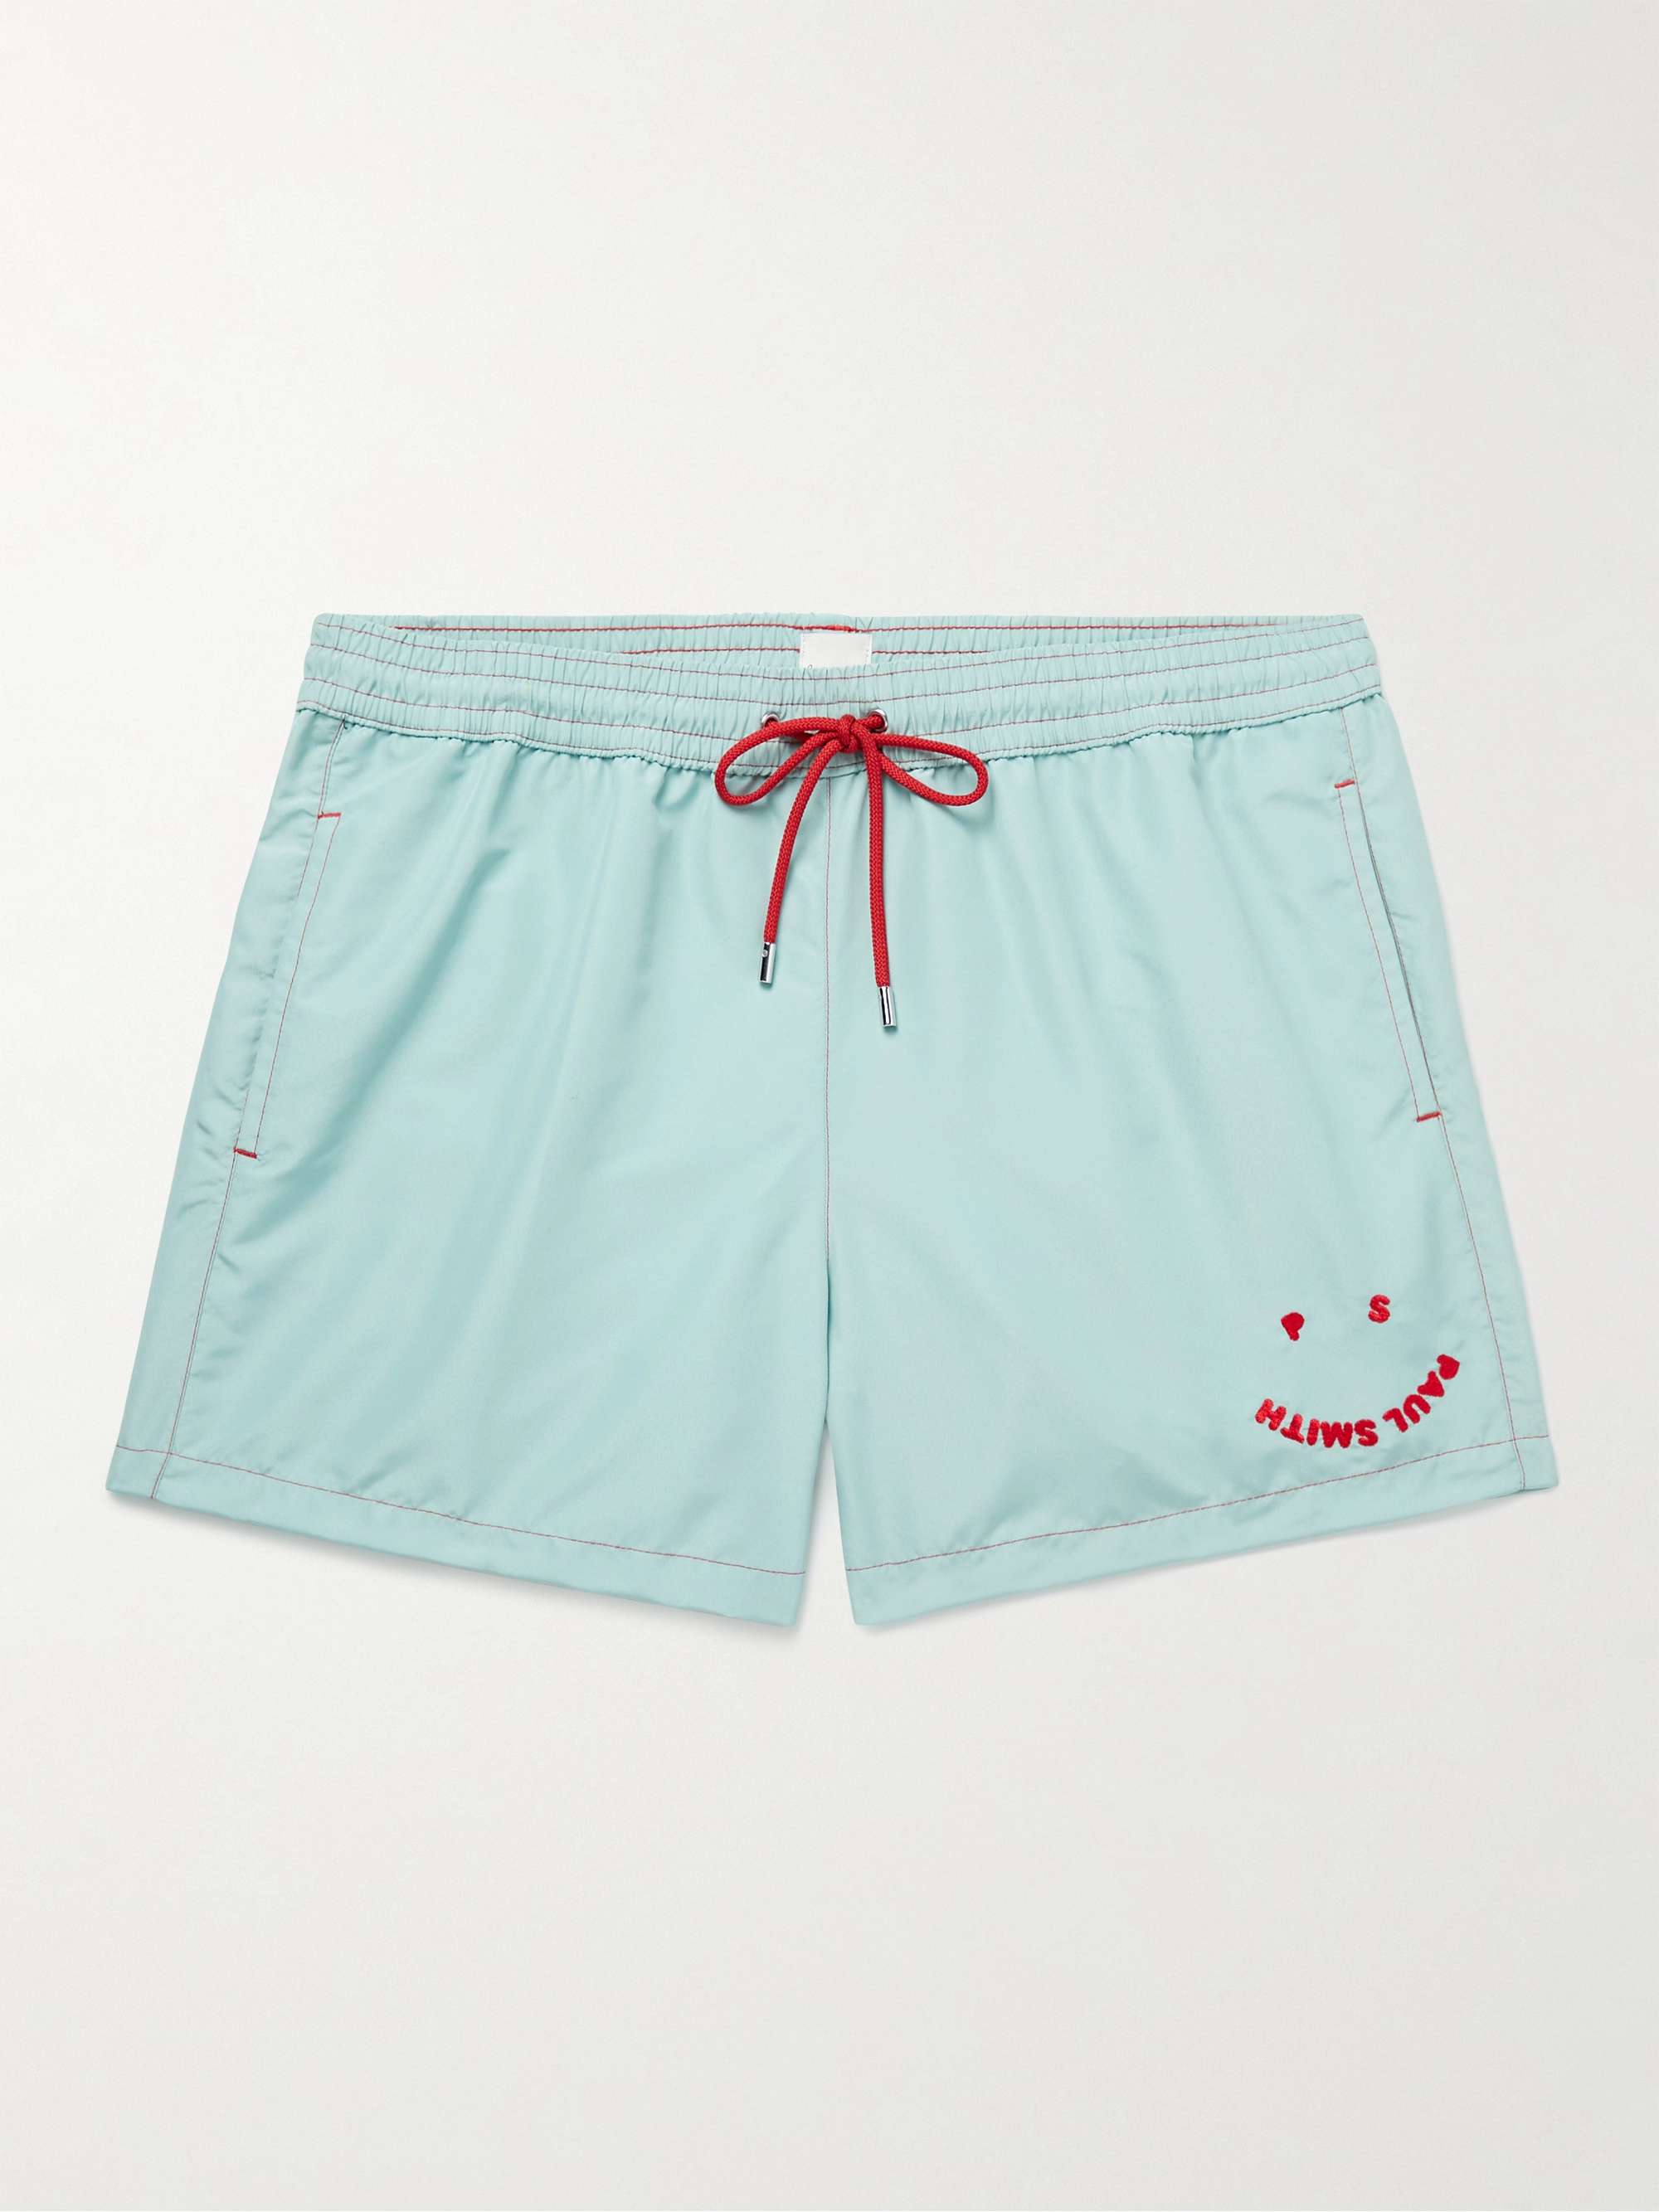 Blue Slim-Fit Short-Length Embroidered Recycled Swim Shorts | PAUL SMITH |  MR PORTER